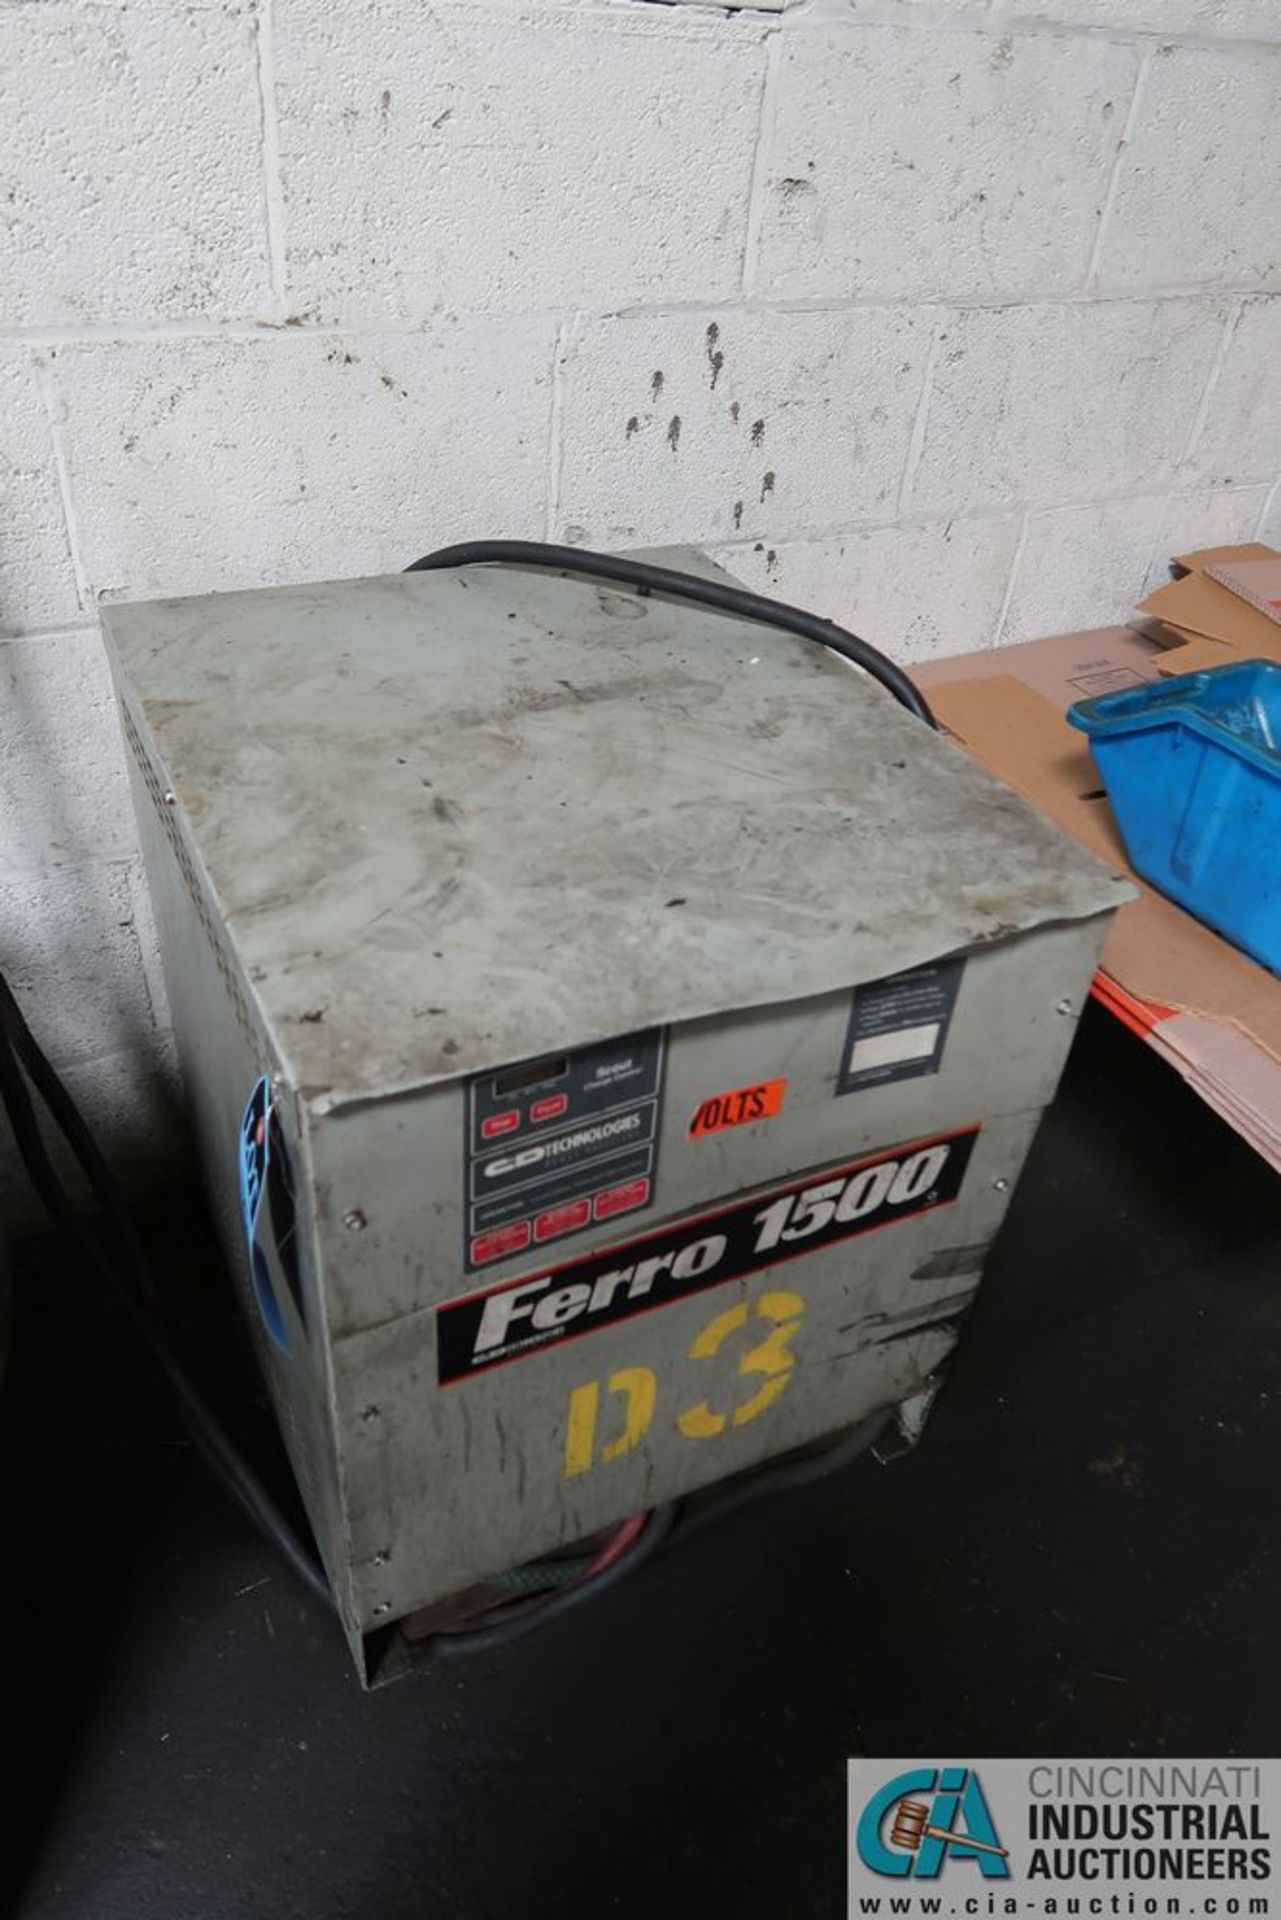 36-VOLT CD TECH FERRO 1500 BATTERY CHARGER (BY START OF AUCTION)